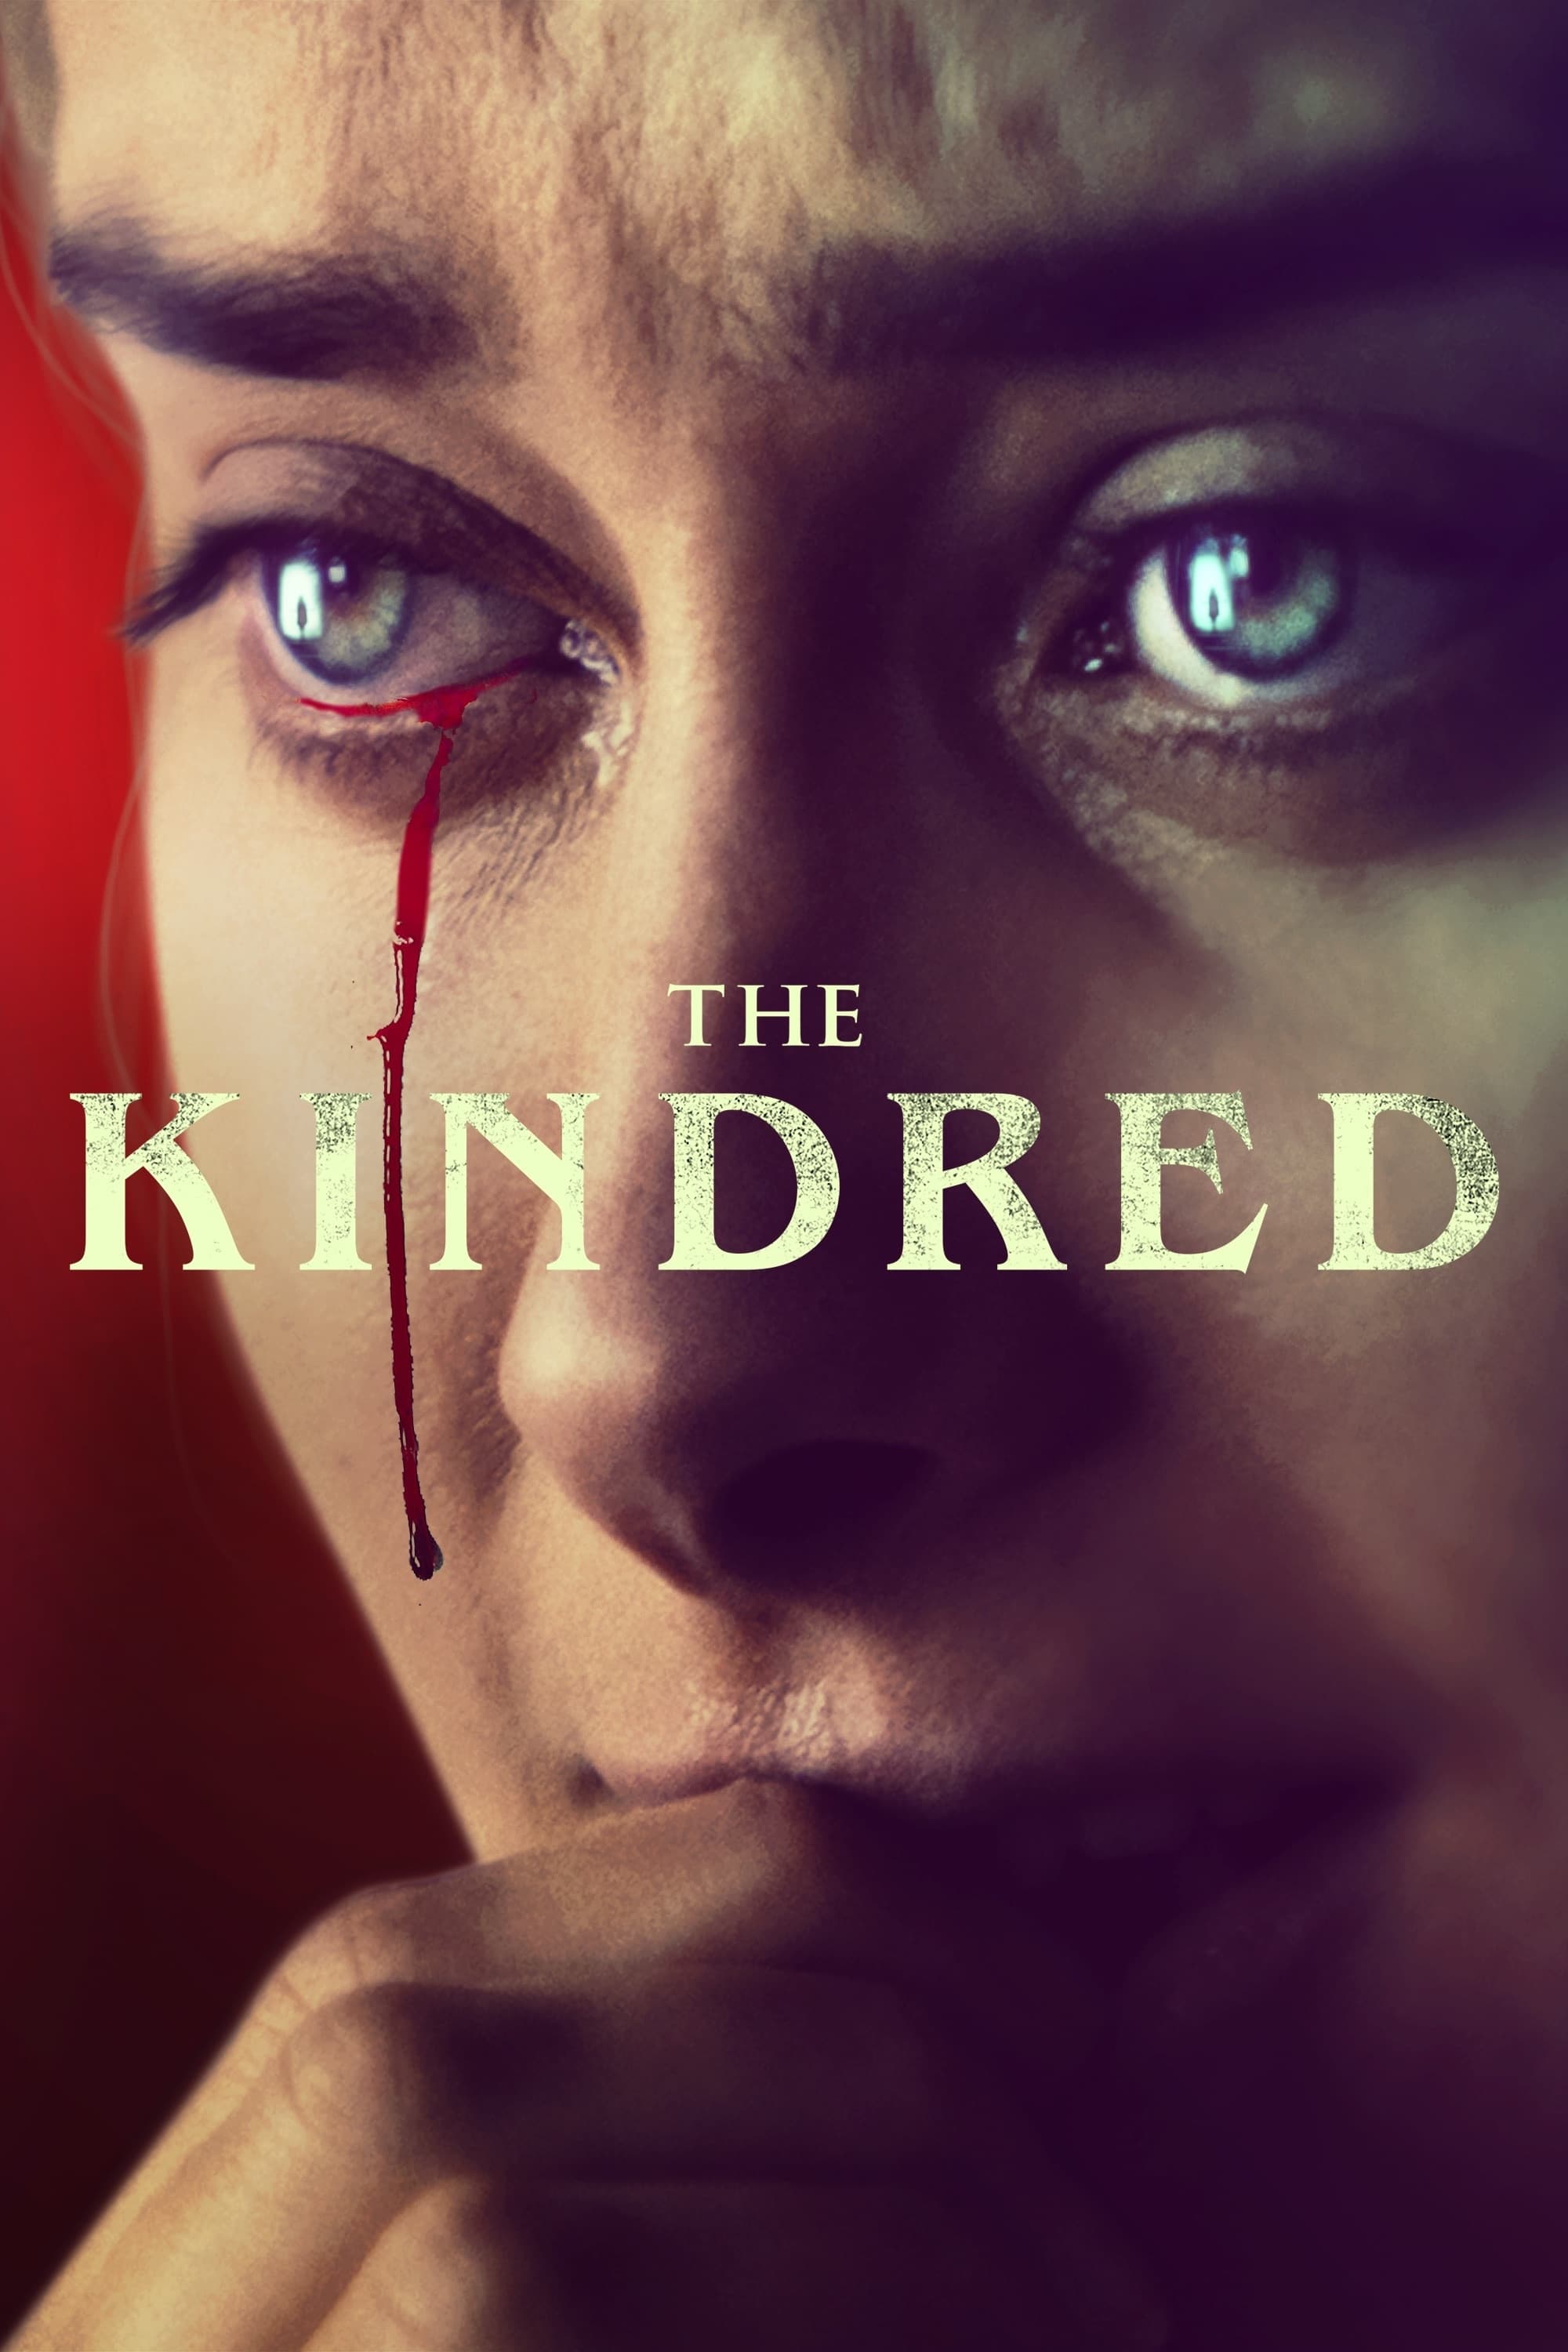 The Kindred film